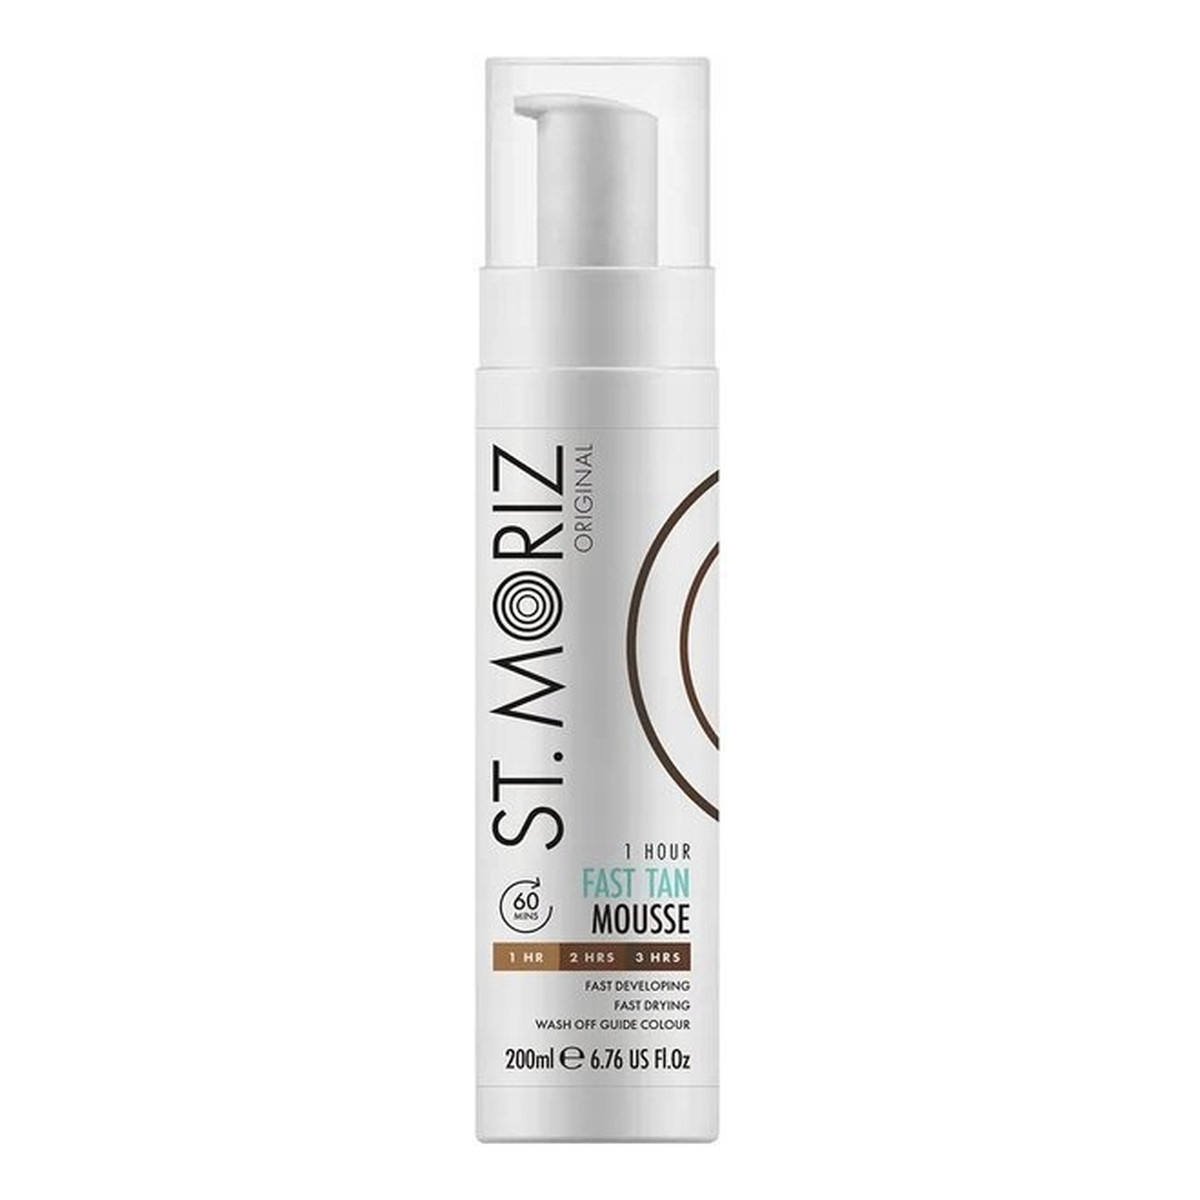 St. Moriz Instant Tanning Mousse Samoopalacz w musie Fast Tan Mousse 200ml